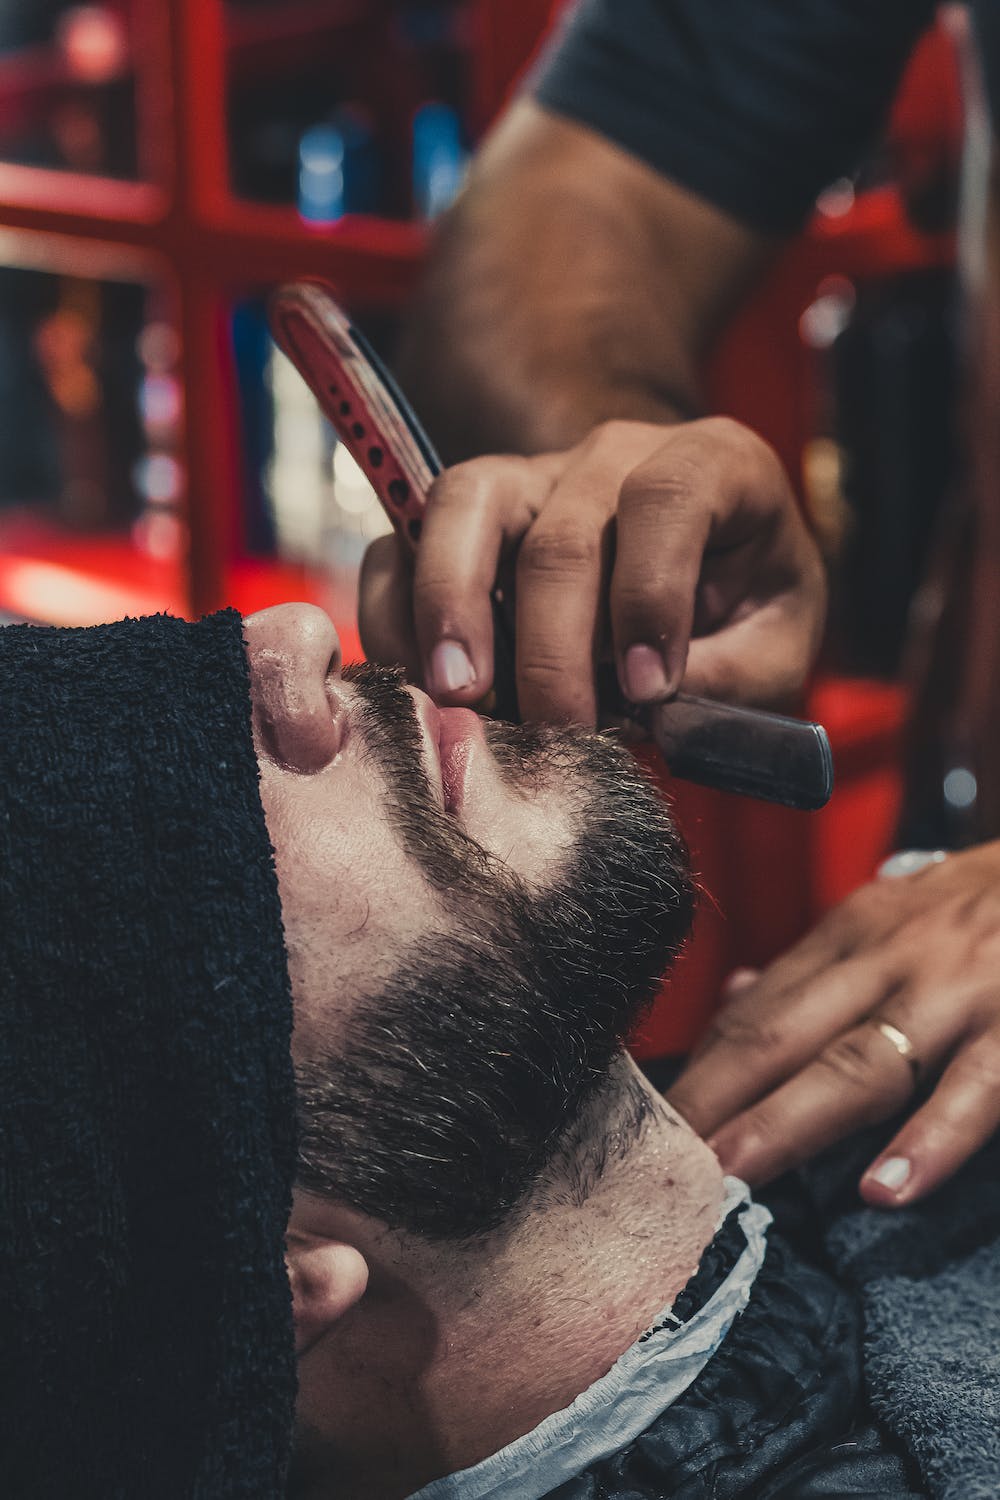 Barber straight razor shaving customers neck area while customer relaxes with a warm towel over his eyes